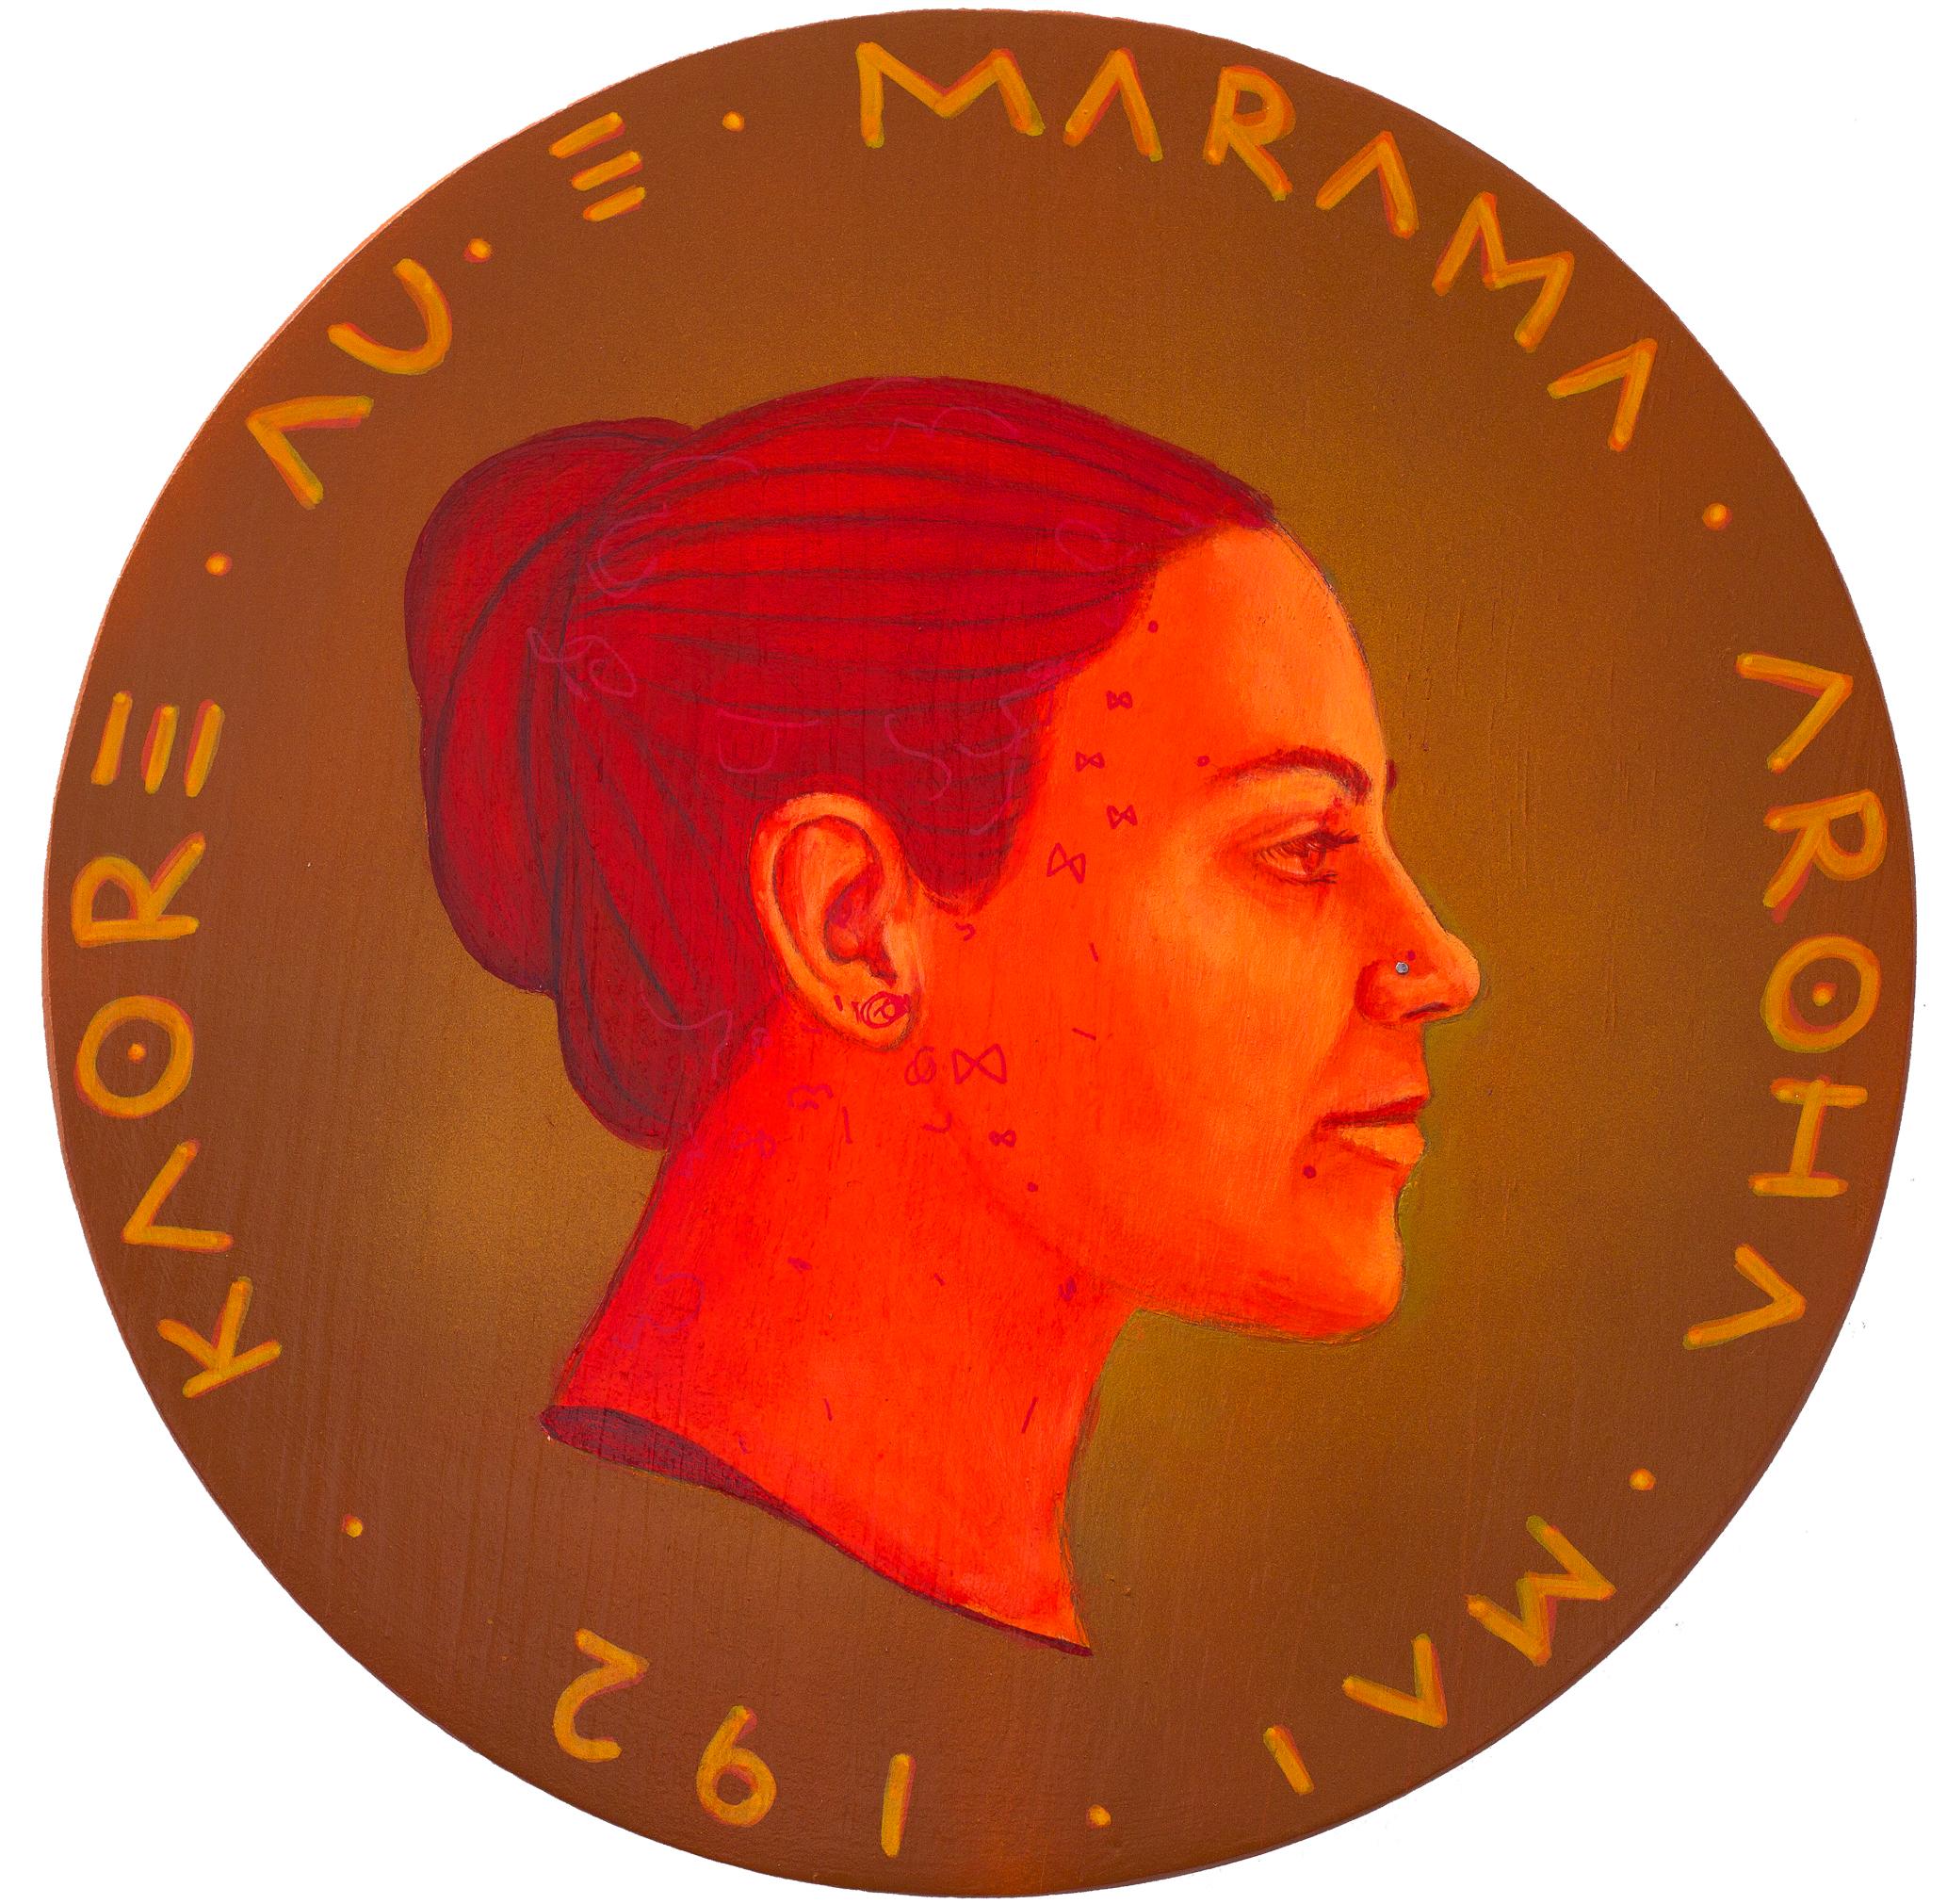 Contemporary Figurative Pop Portrait on Wooden Wood Coin. Maori. "Currency #218"